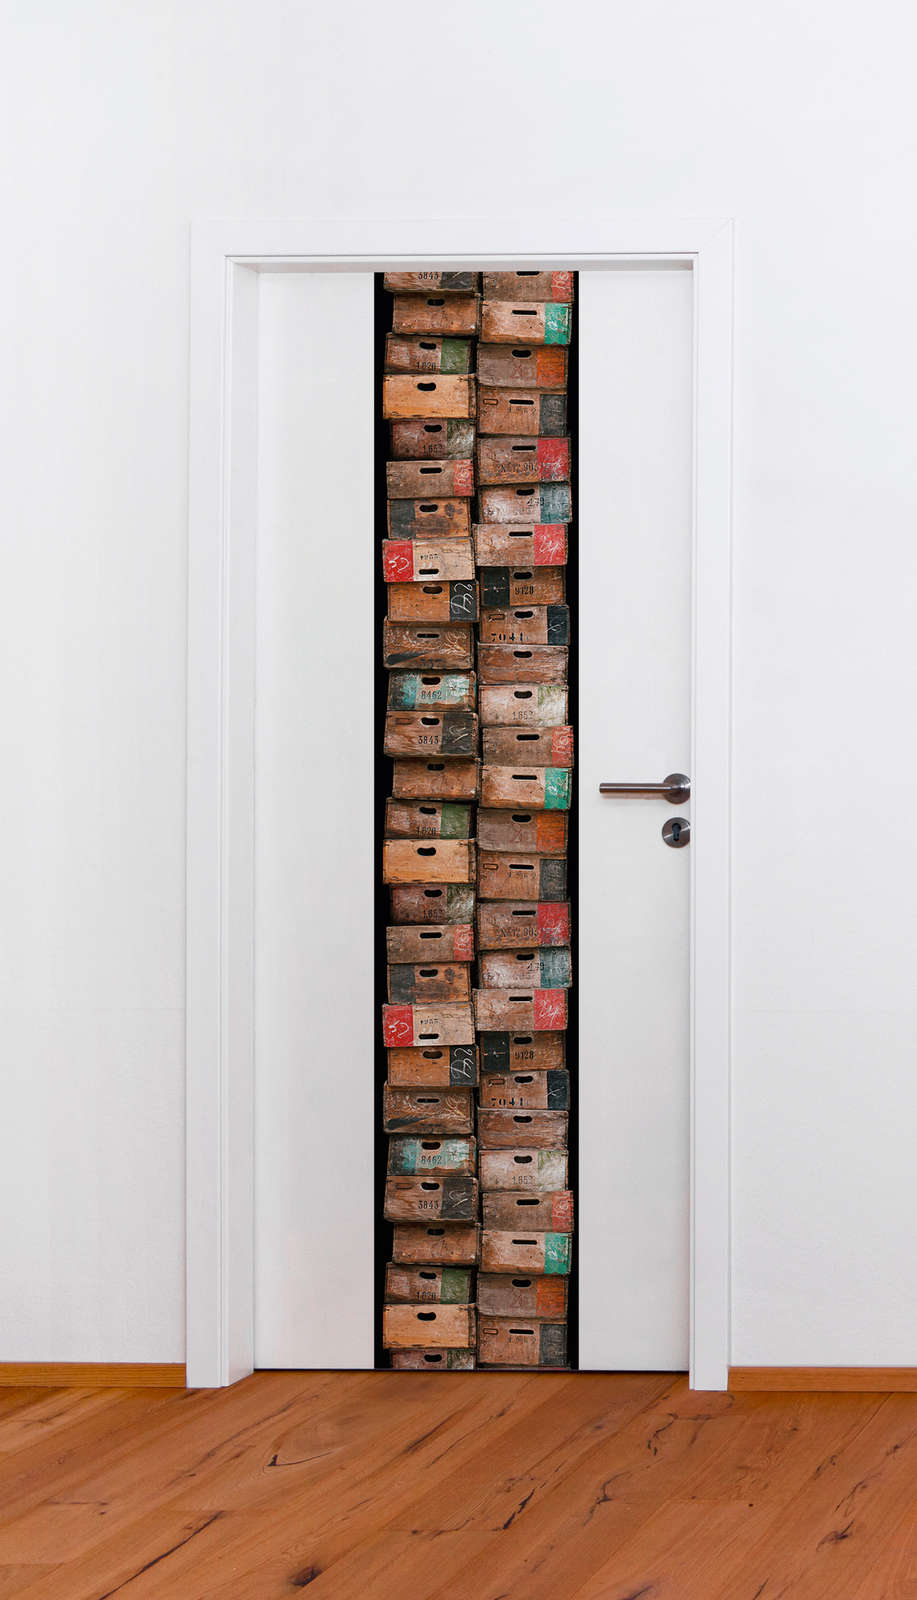             Motif wallpaper with rustic wooden boxes in used look - Brown, Colorful
        